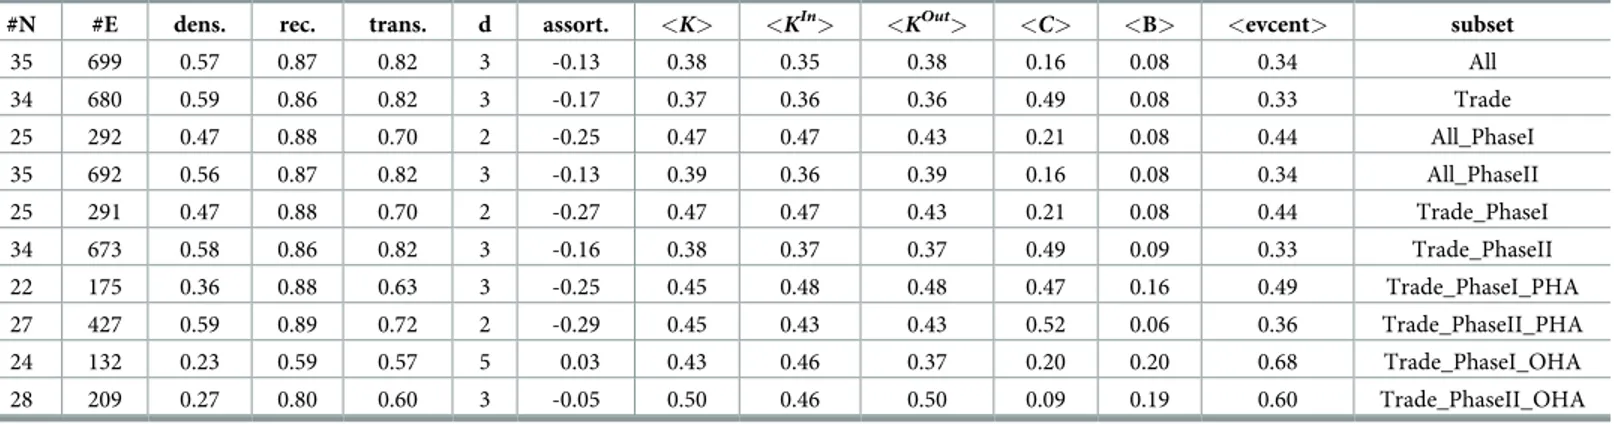 Table 2 also shows that the EU ETS is a slightly disassortative network, meaning that coun- coun-terparts usually tend to be connected with nodes dissimilar in terms of degree distribution, thus in line with other infrastructural networks (see e.g., [ 25 –